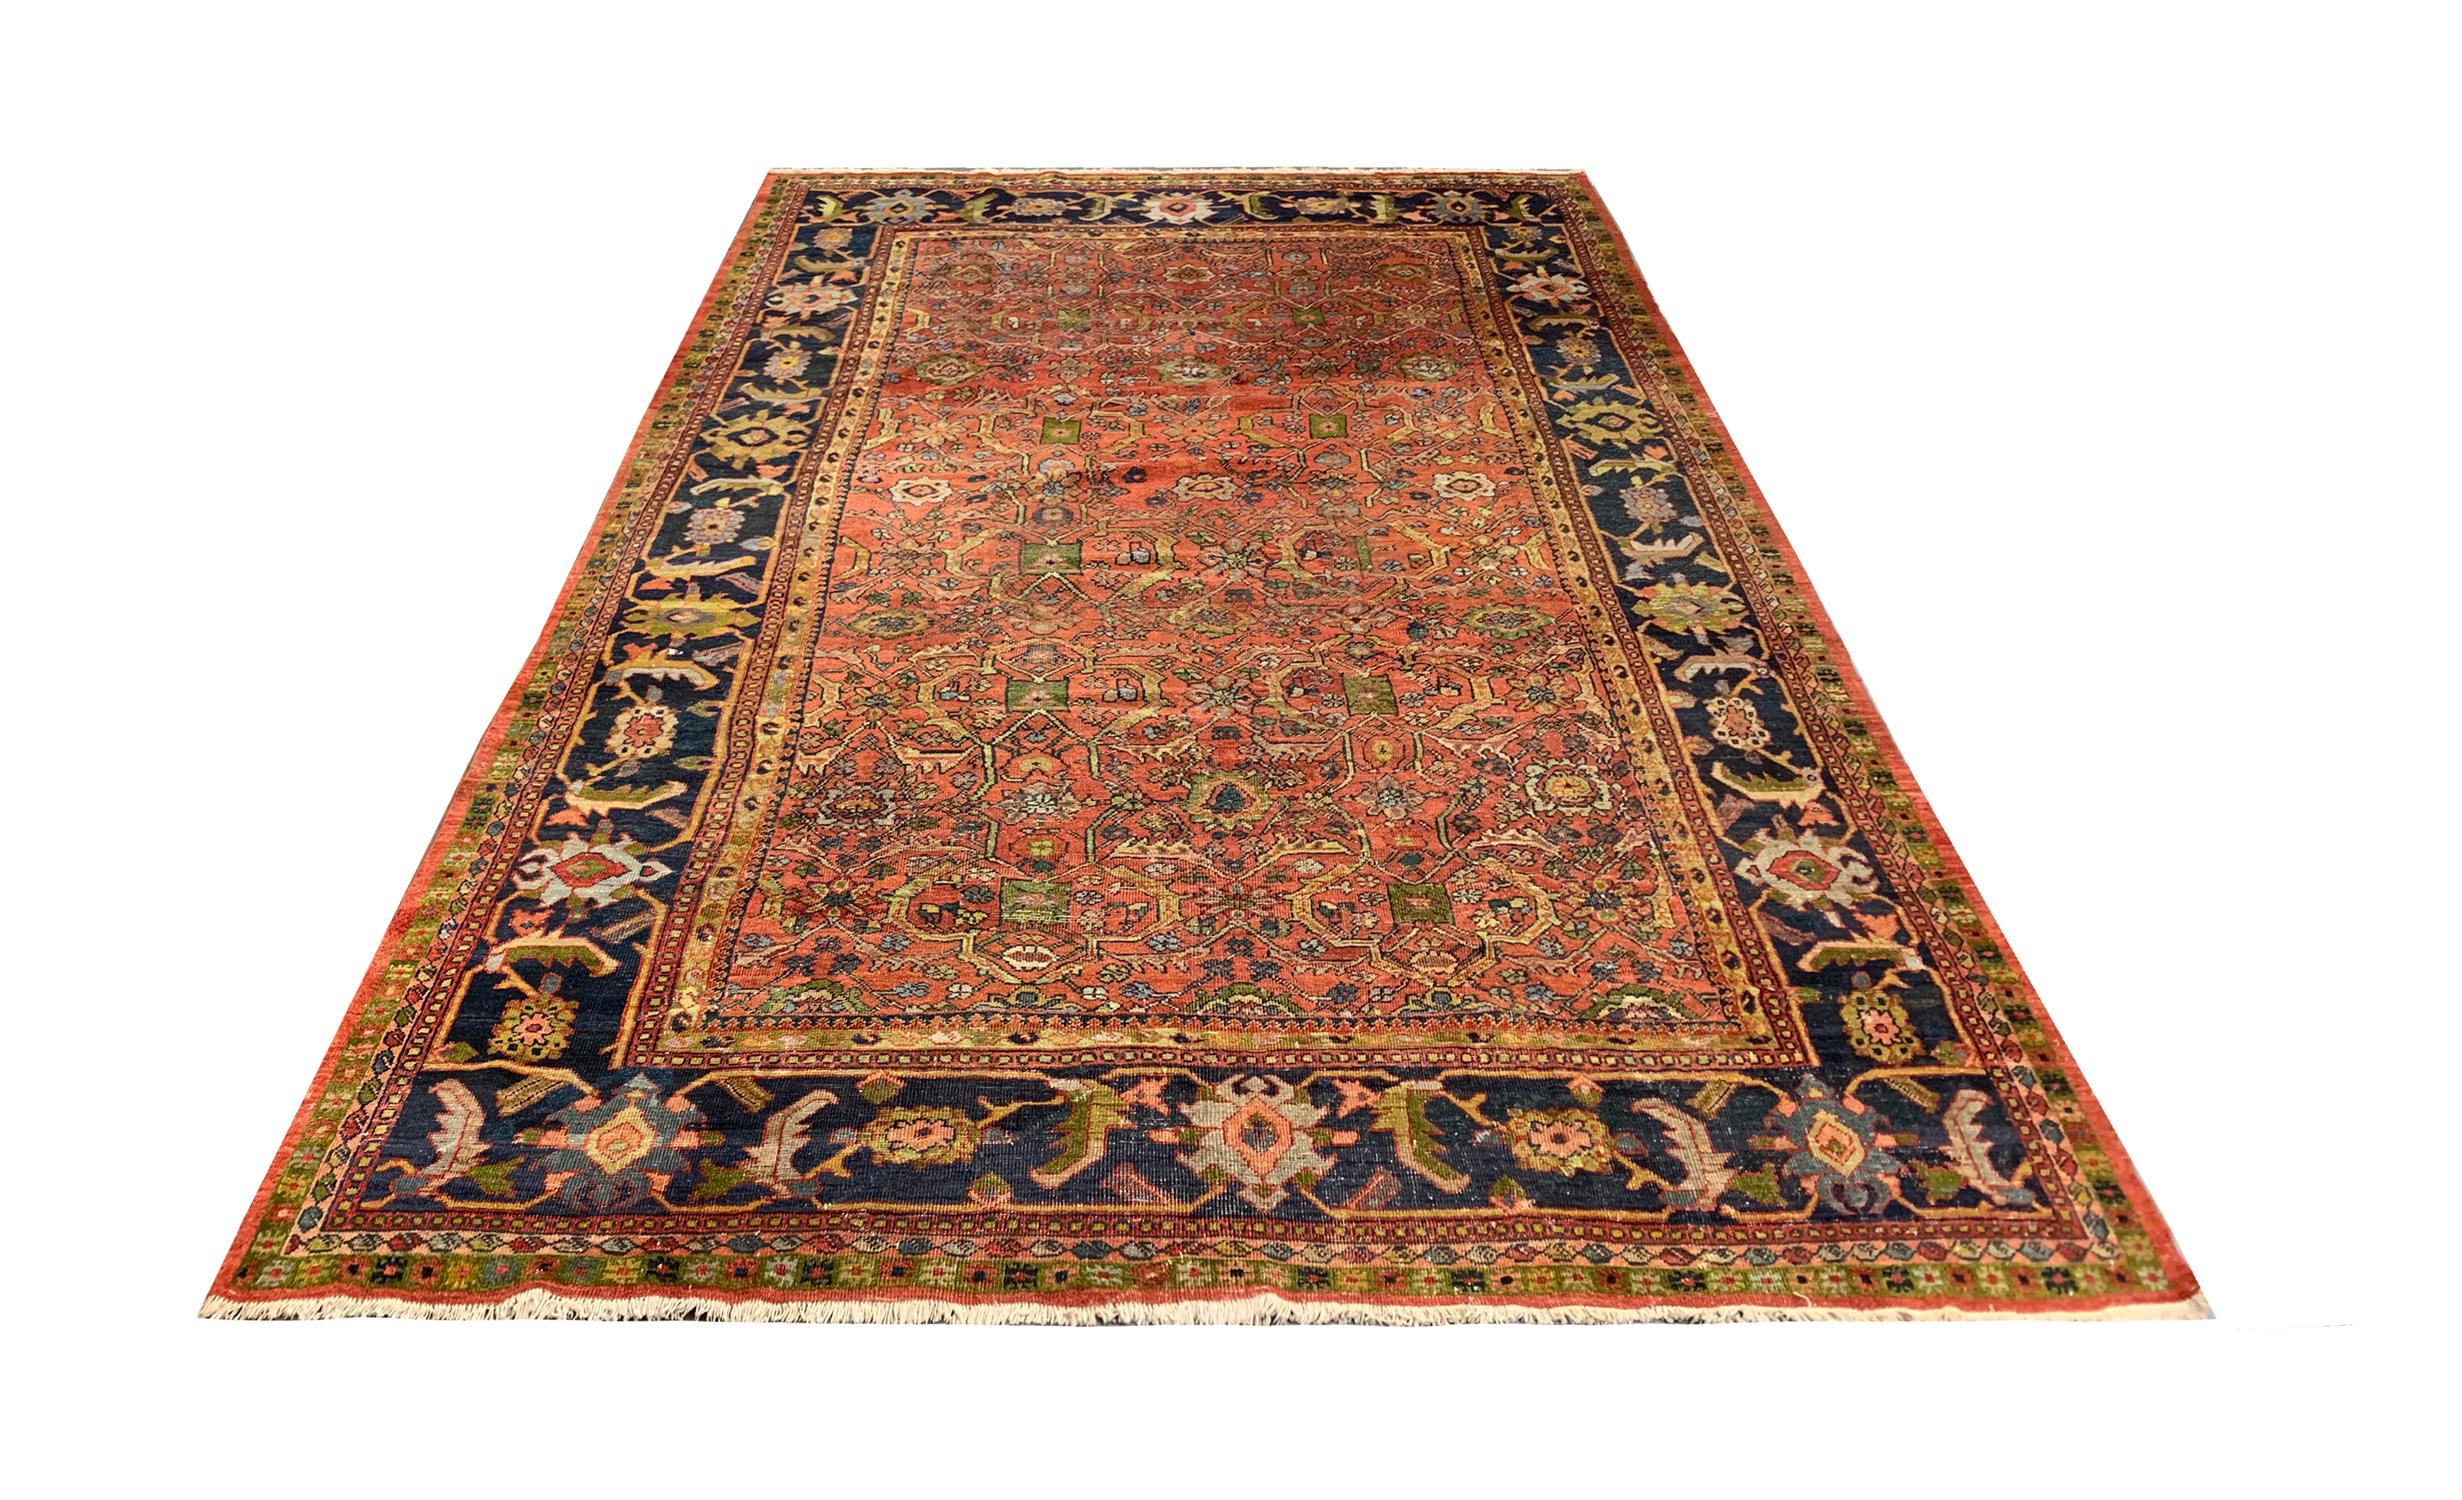 Handmade caucasian carpets are some of the most desirable among rustic rugs due to their decorative aesthetic with unique and spatial variations of all over designs and decorative borders. This piece was woven by hand and featured a symmetrical